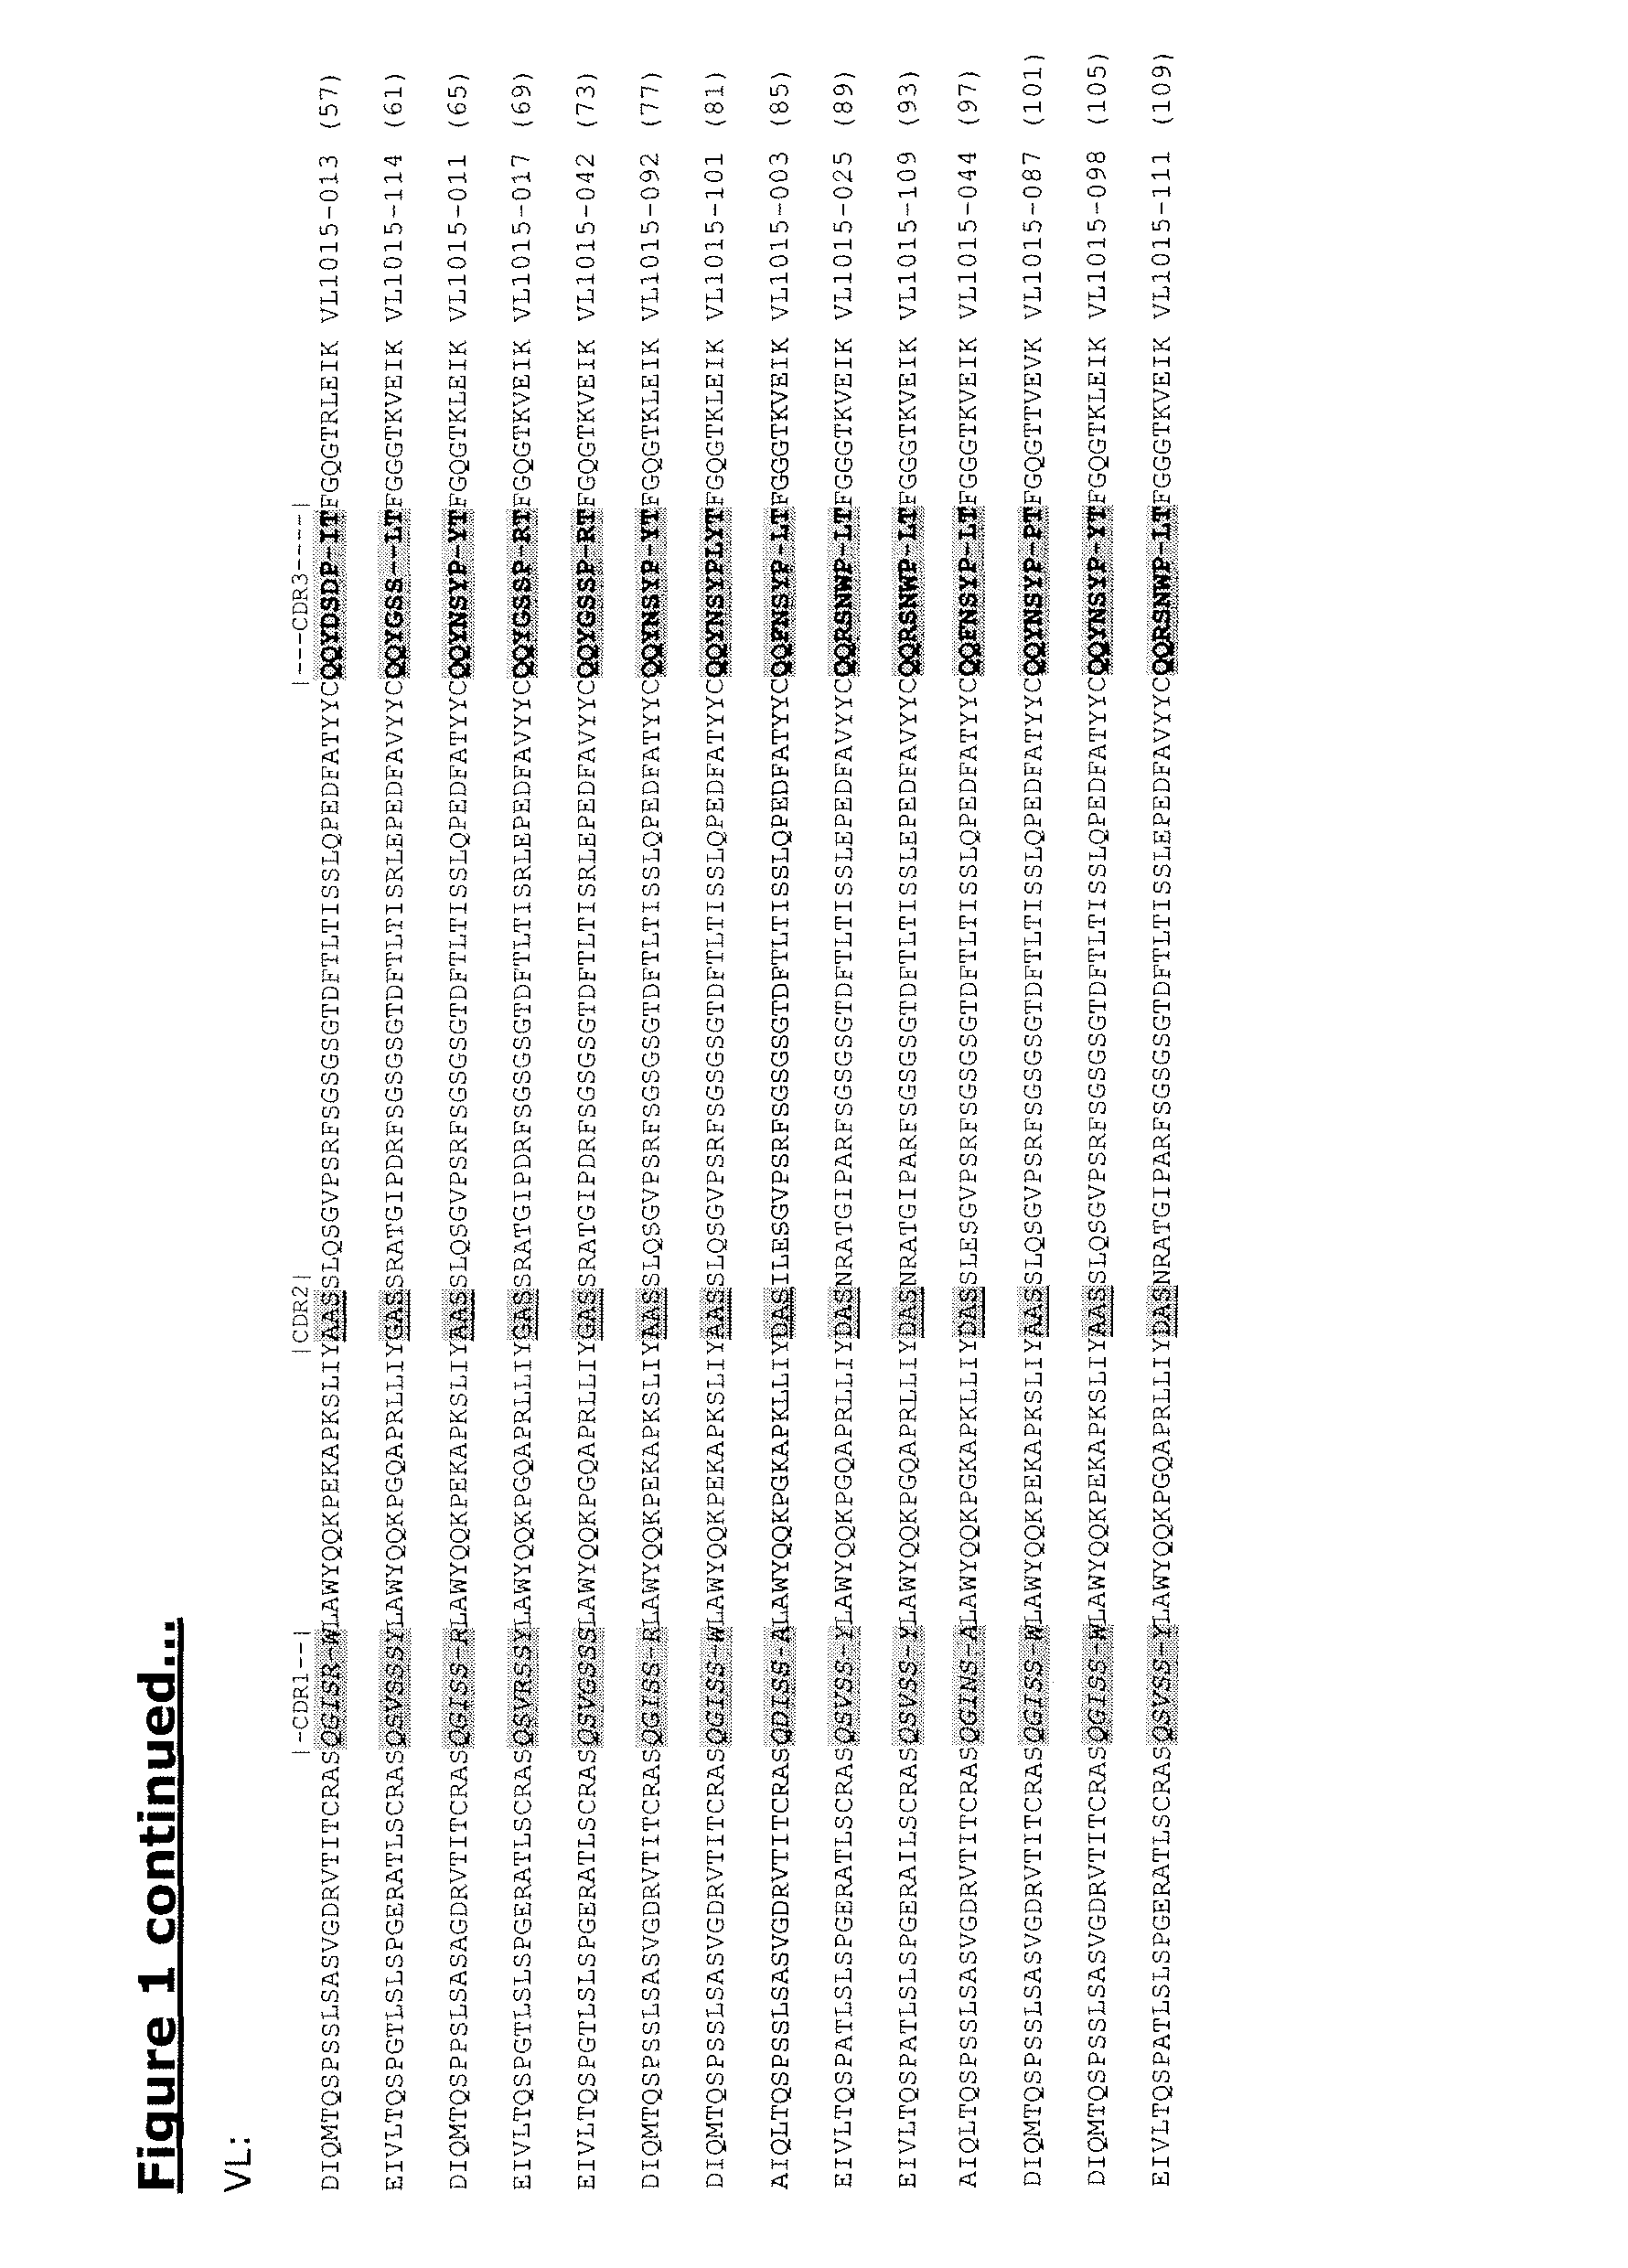 Human antibodies against tissue factor and methods of use thereof